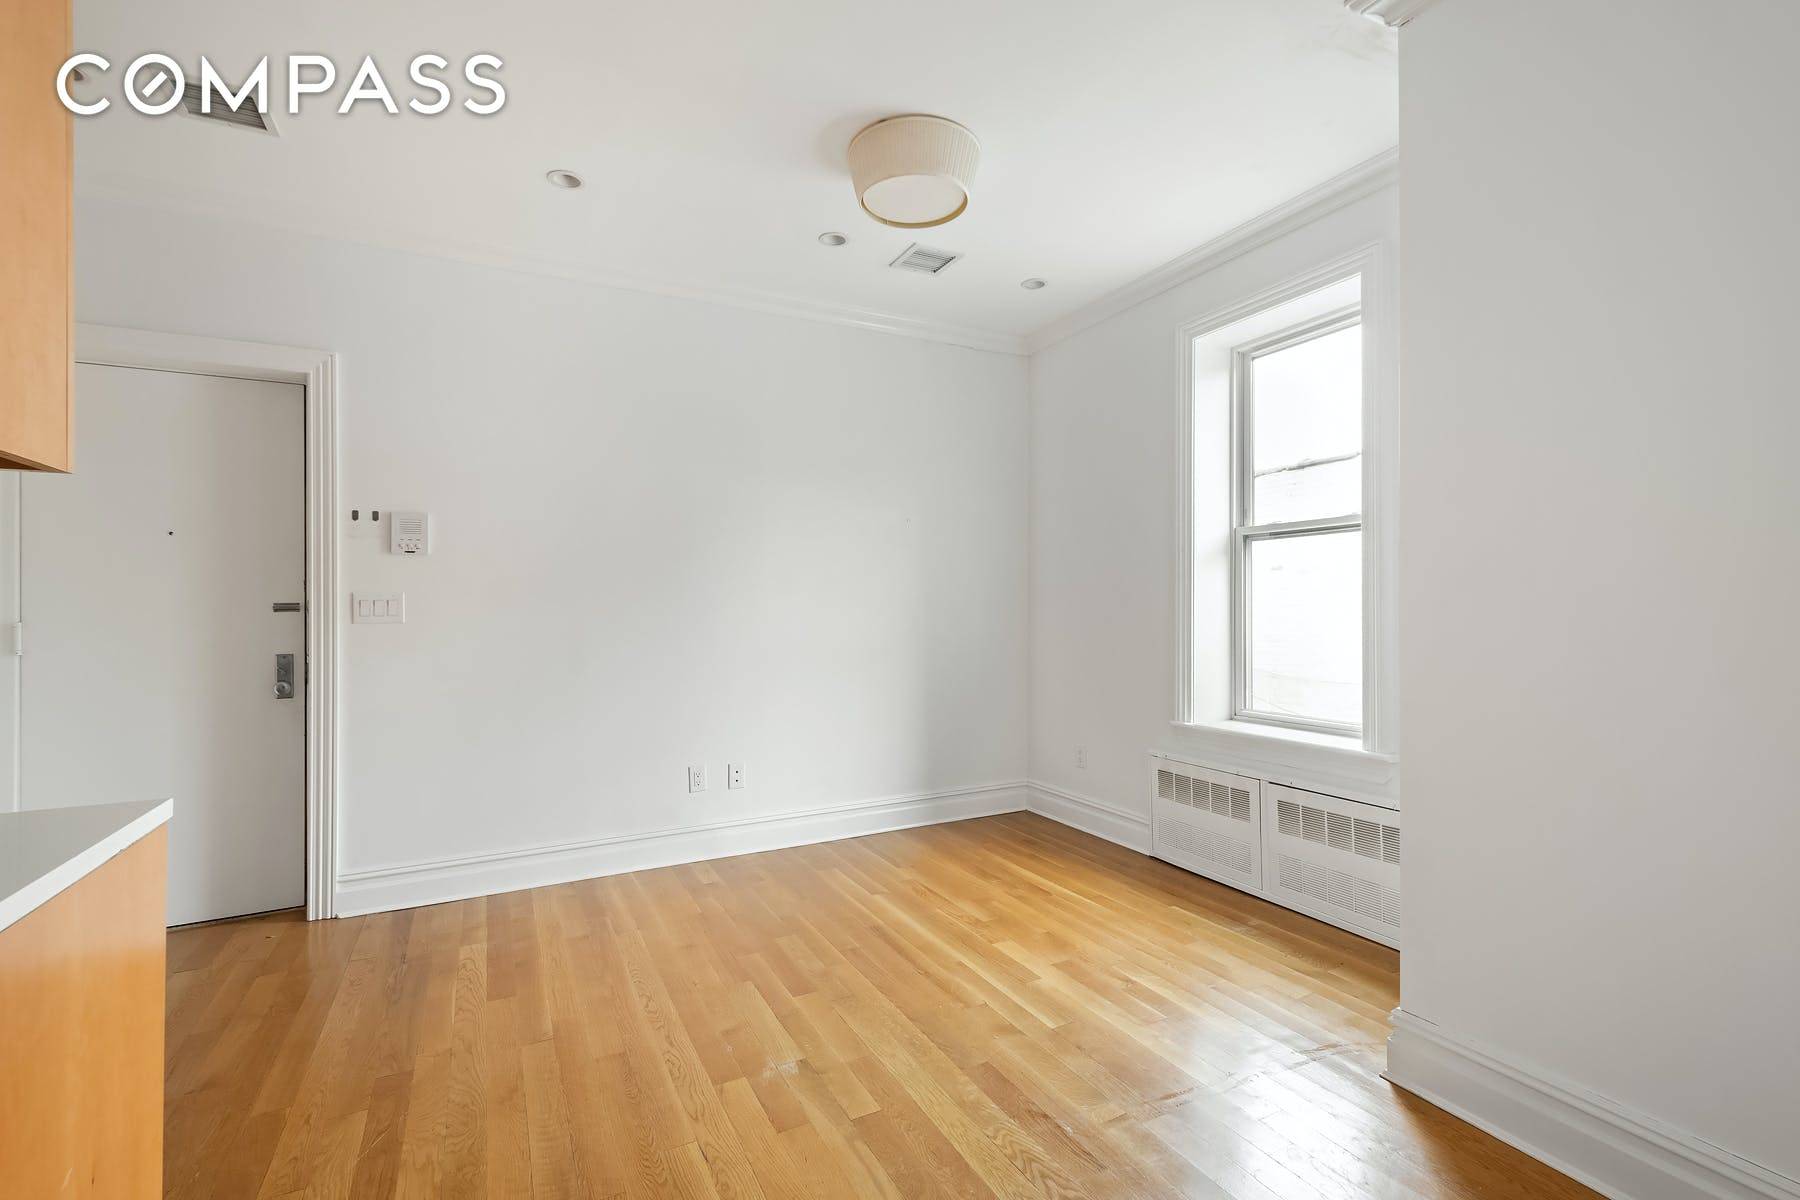 Luxuriously Renovated 2 Bedroom w Private Balcony Three Blocks from Prospect Park This gorgeous 2BR 1BA will allure you with its luxurious renovations, excellent layout and bright natural light.